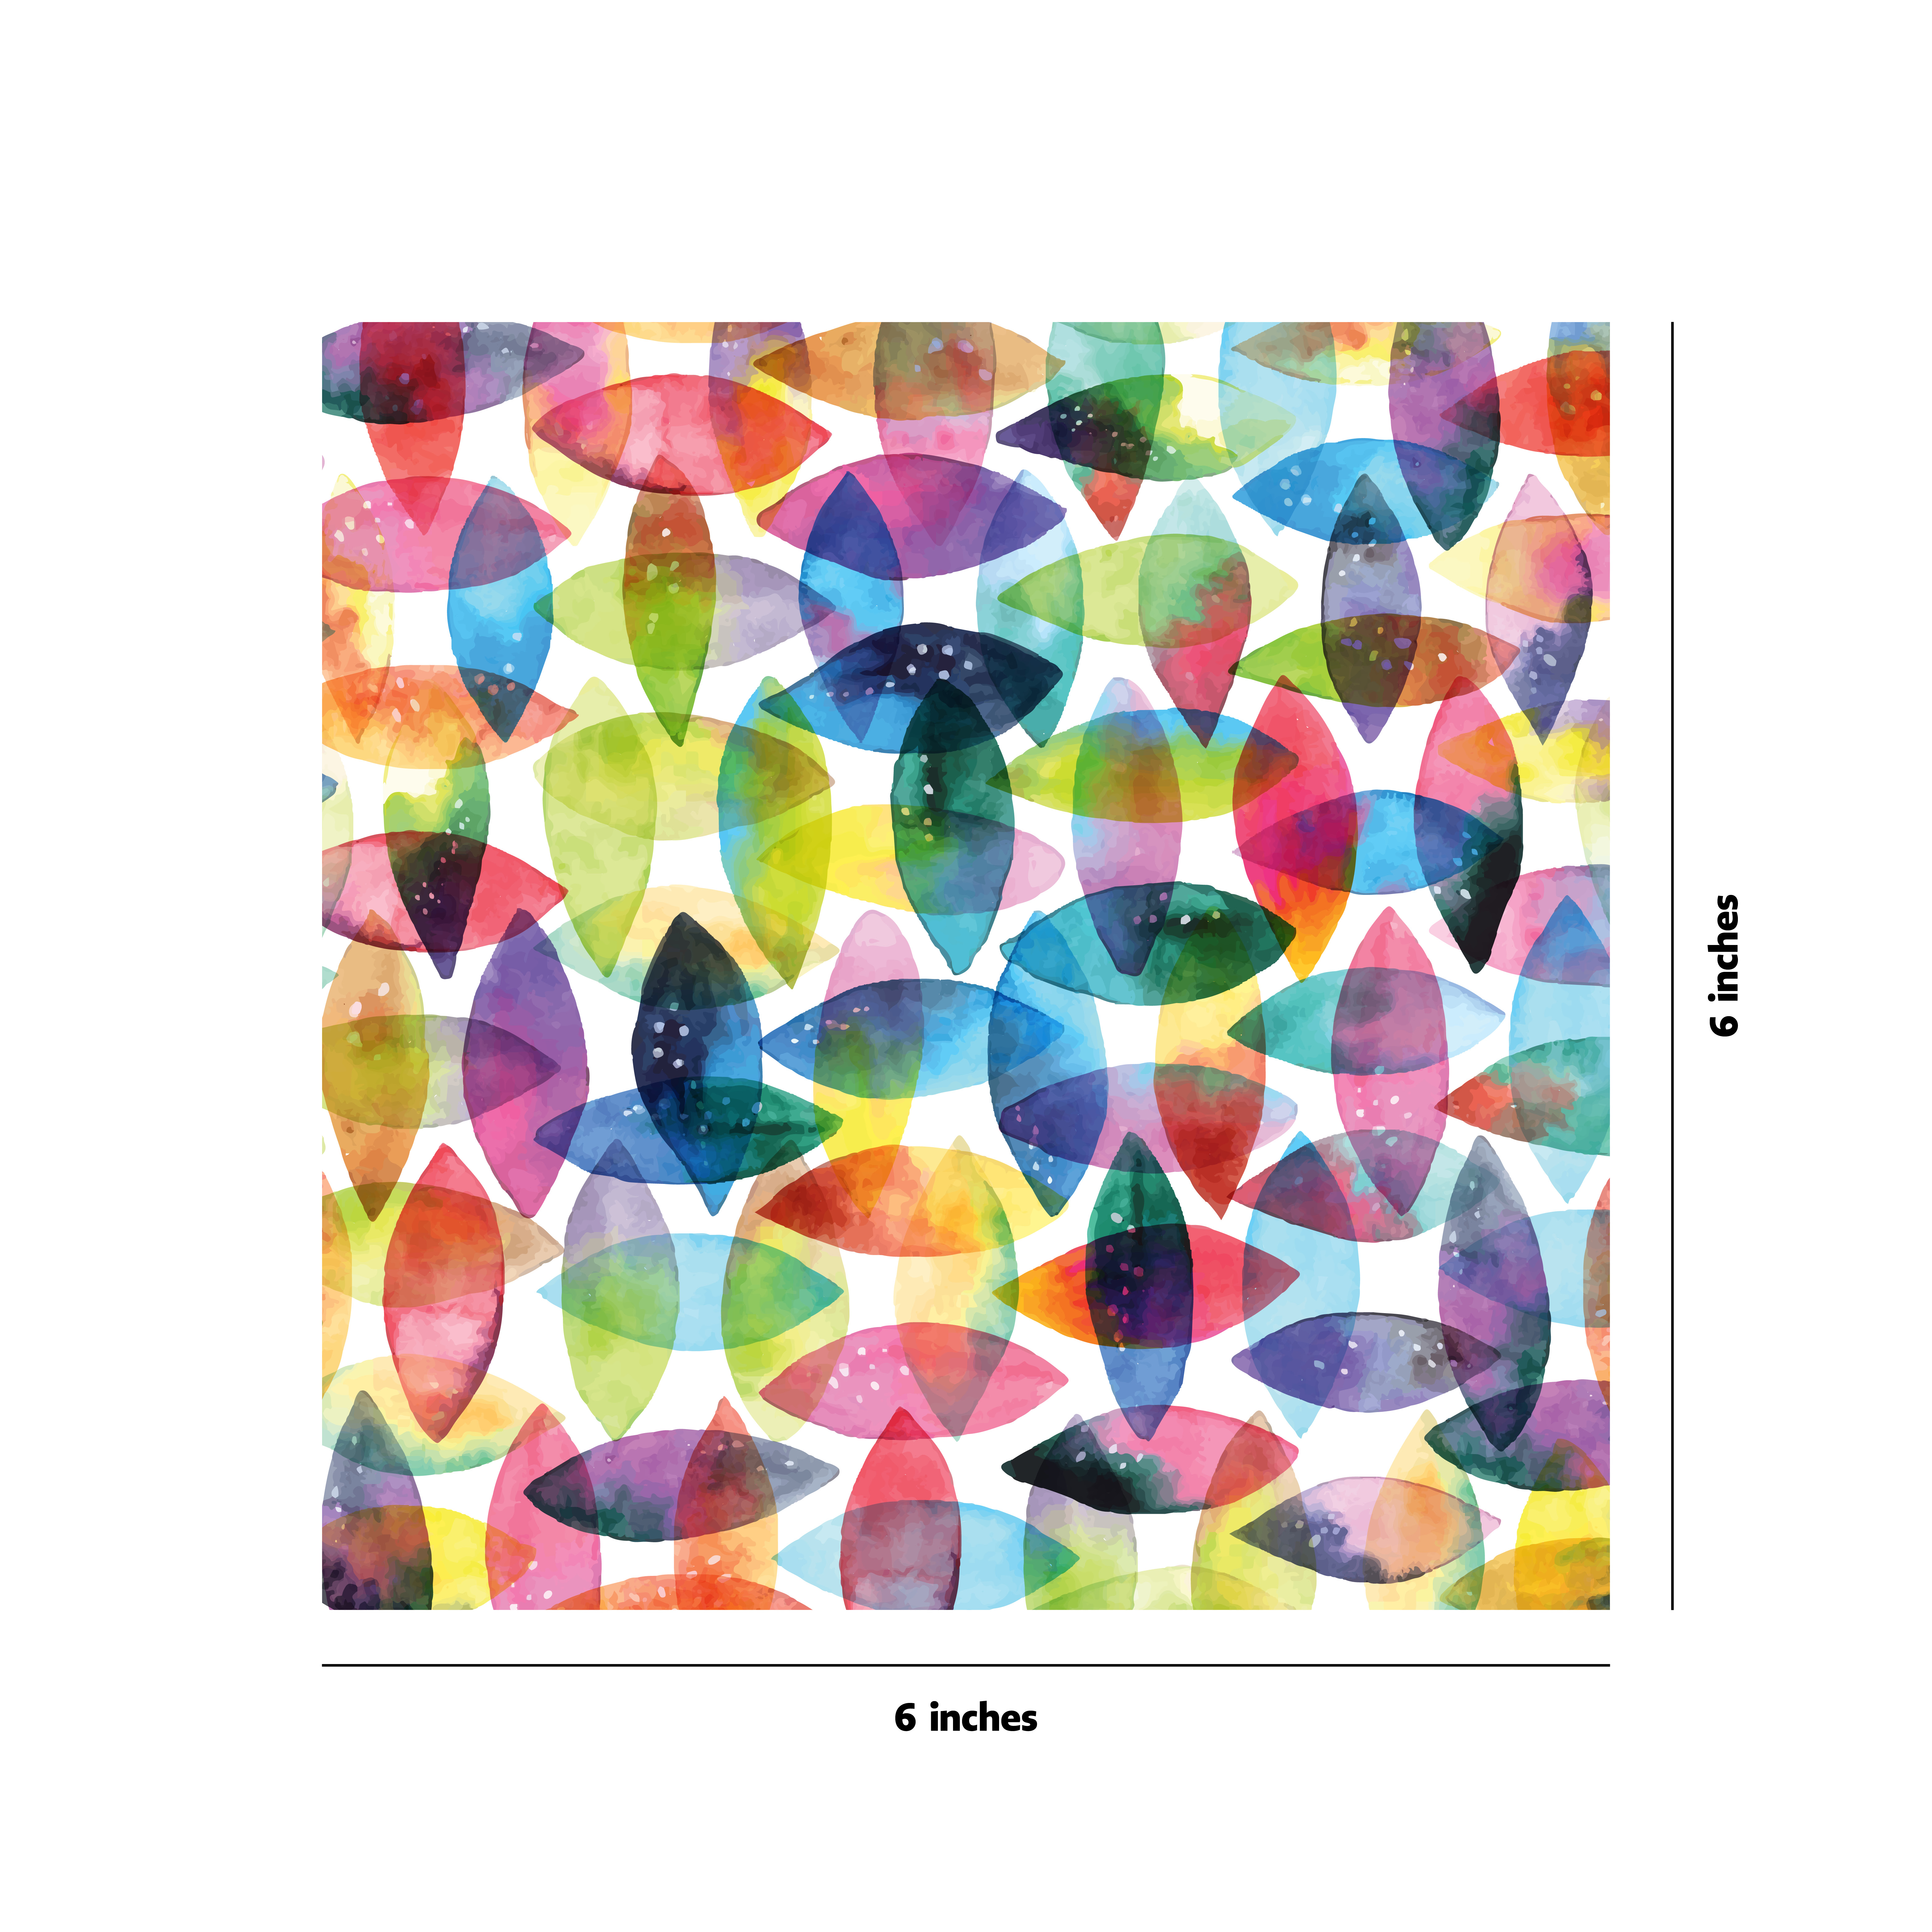 Origami Paper 200 sheets Rainbow Patterns 6" (15 cm)